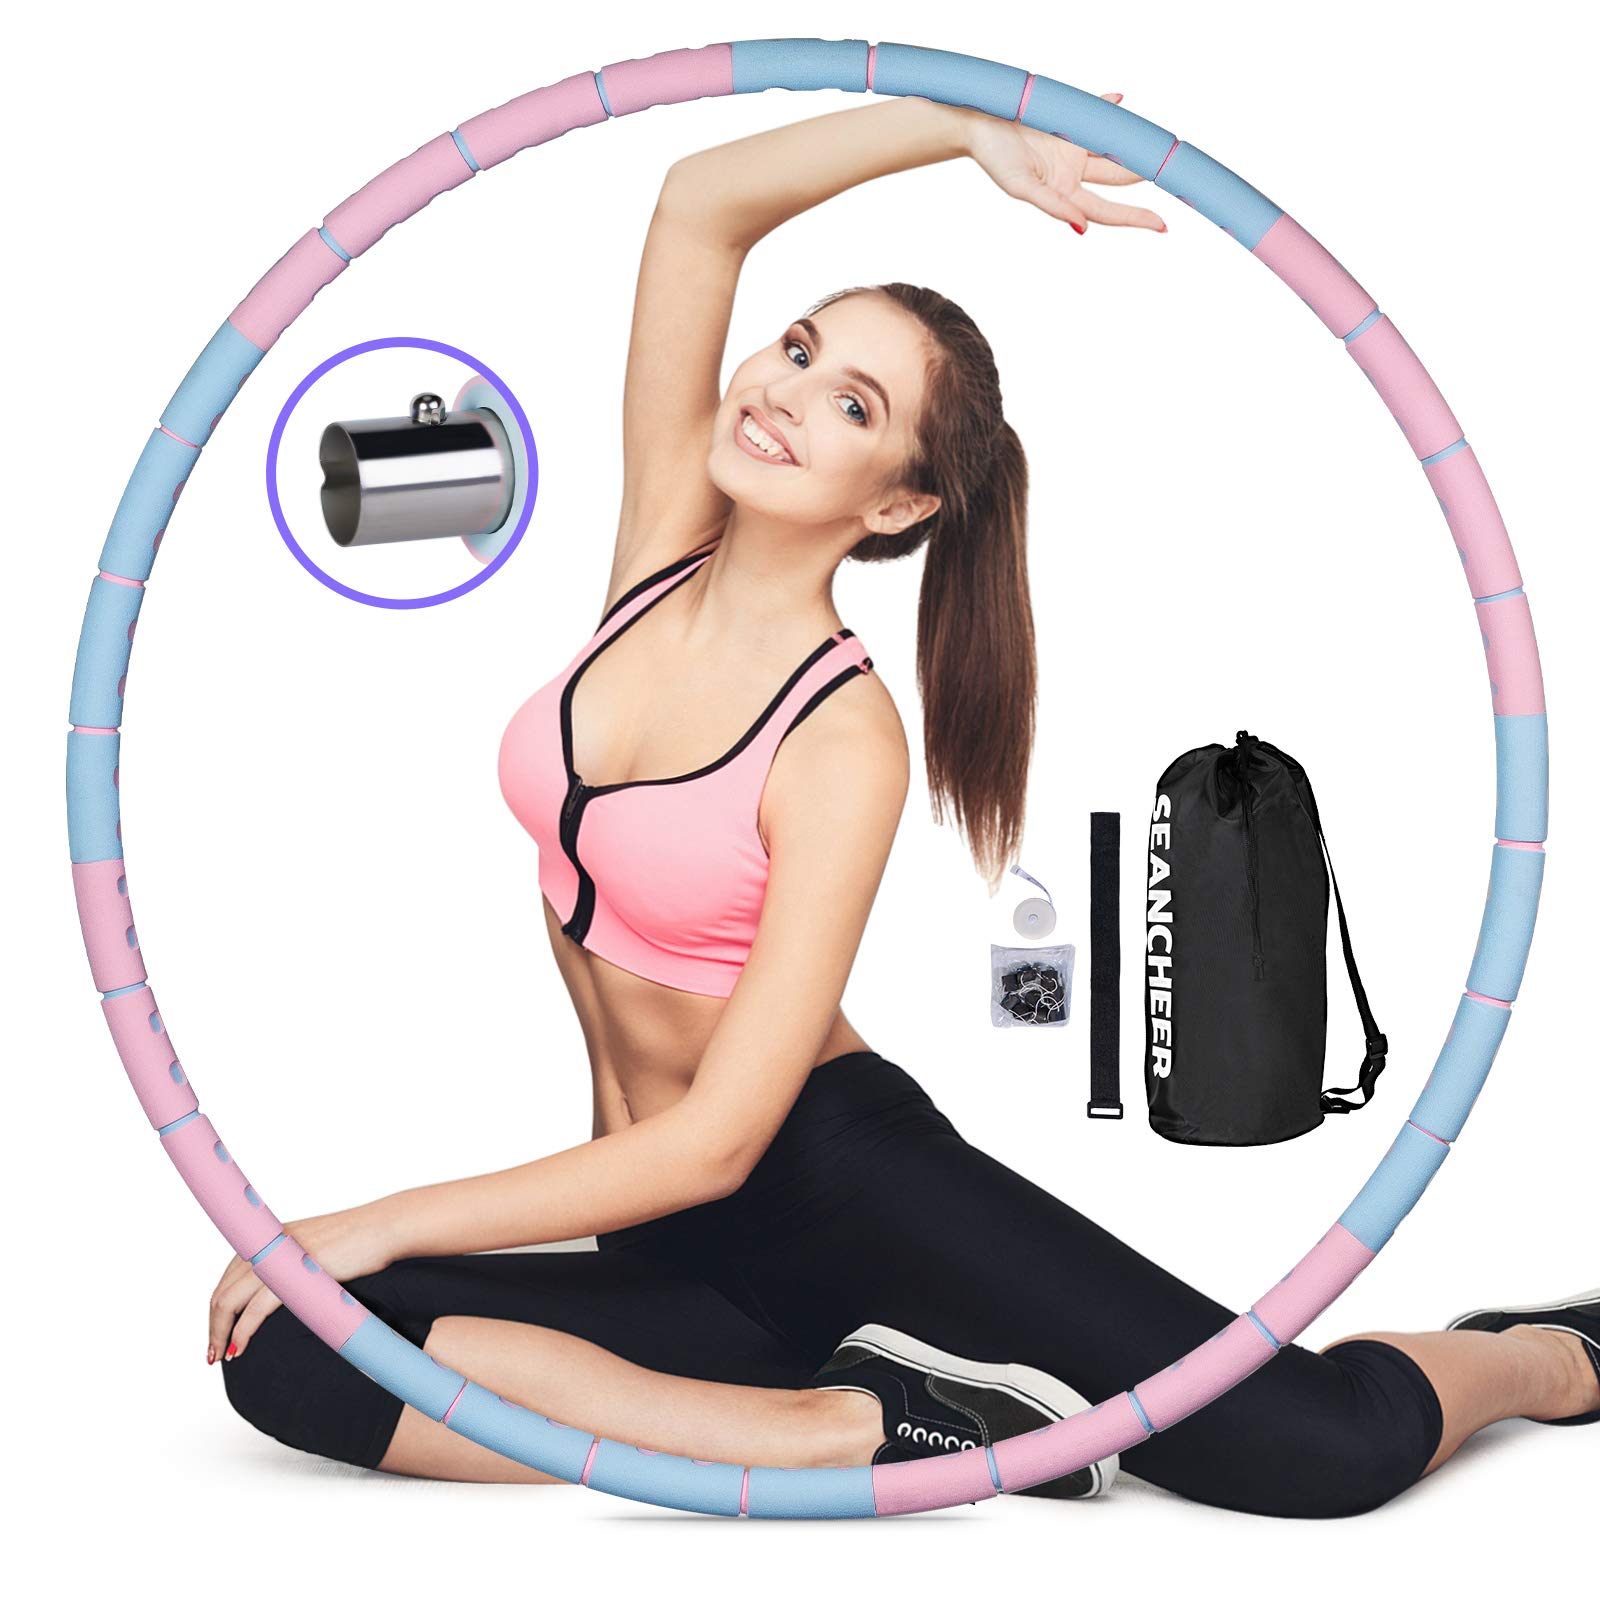 Weighted Hula Hoop for Adults Weight Loss - 8 Section Detachable Exercise  Hula Hoop for Women, Soft Padded Exercise Hoop, Portable and Adjustable